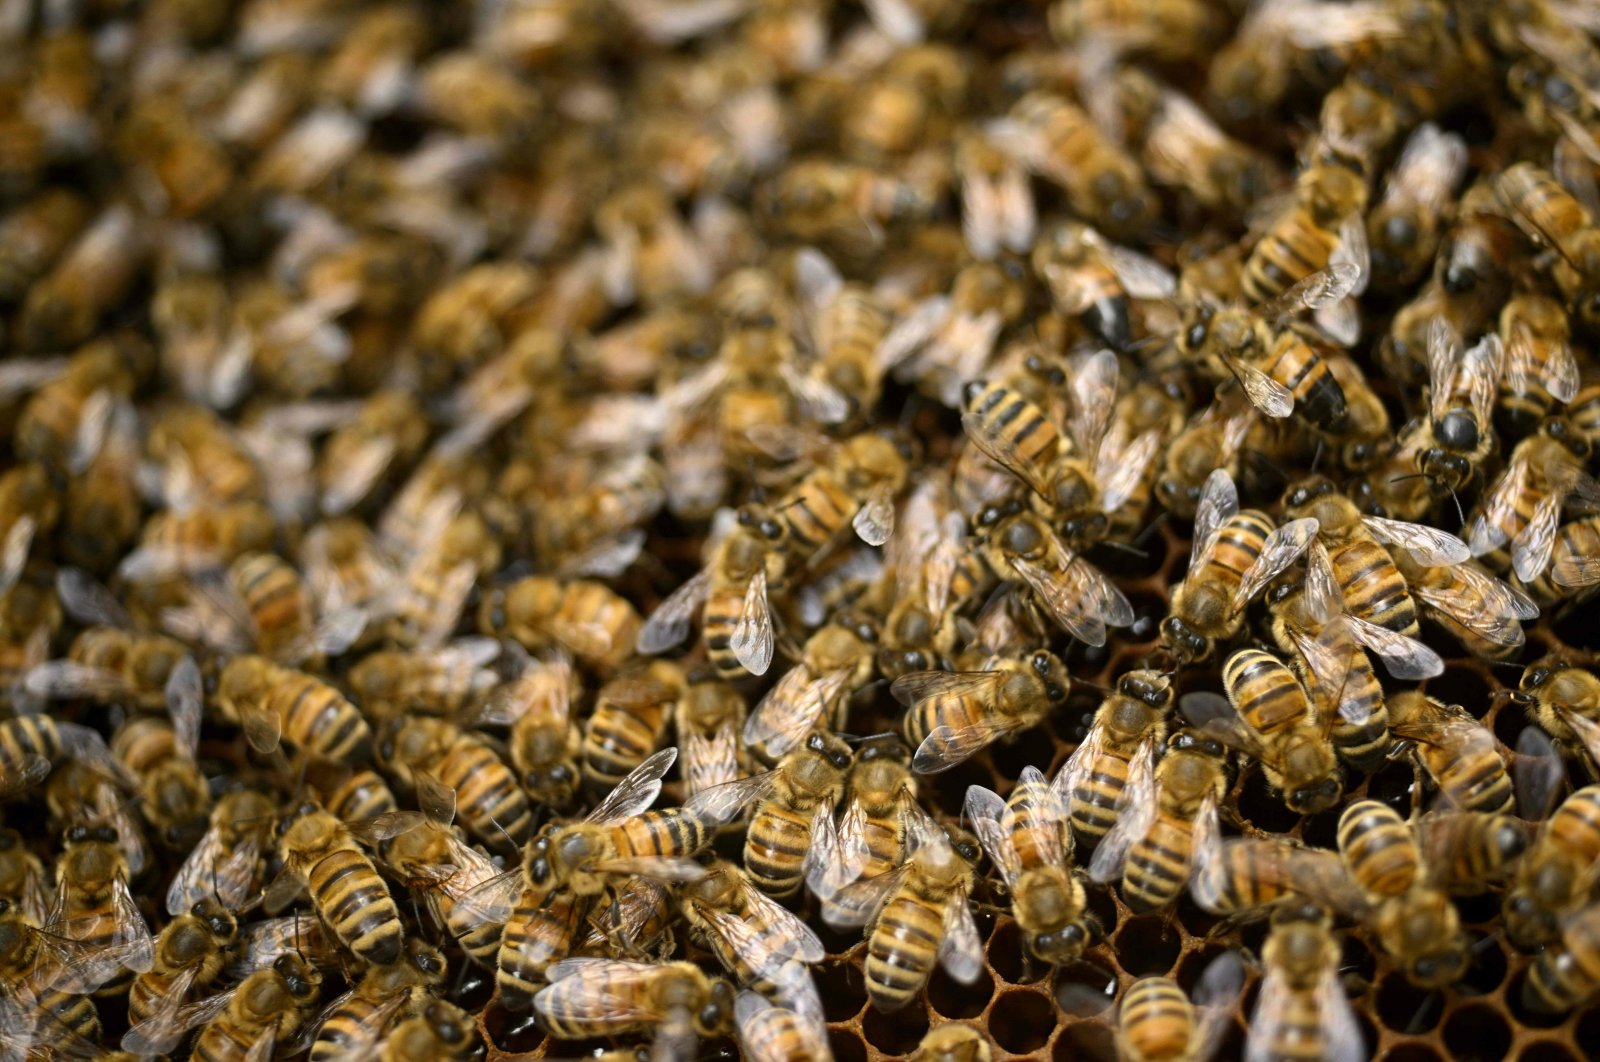 Bees work in their hive in Isokyro, western Finland, Sept. 11, 2022. (AFP Photo)